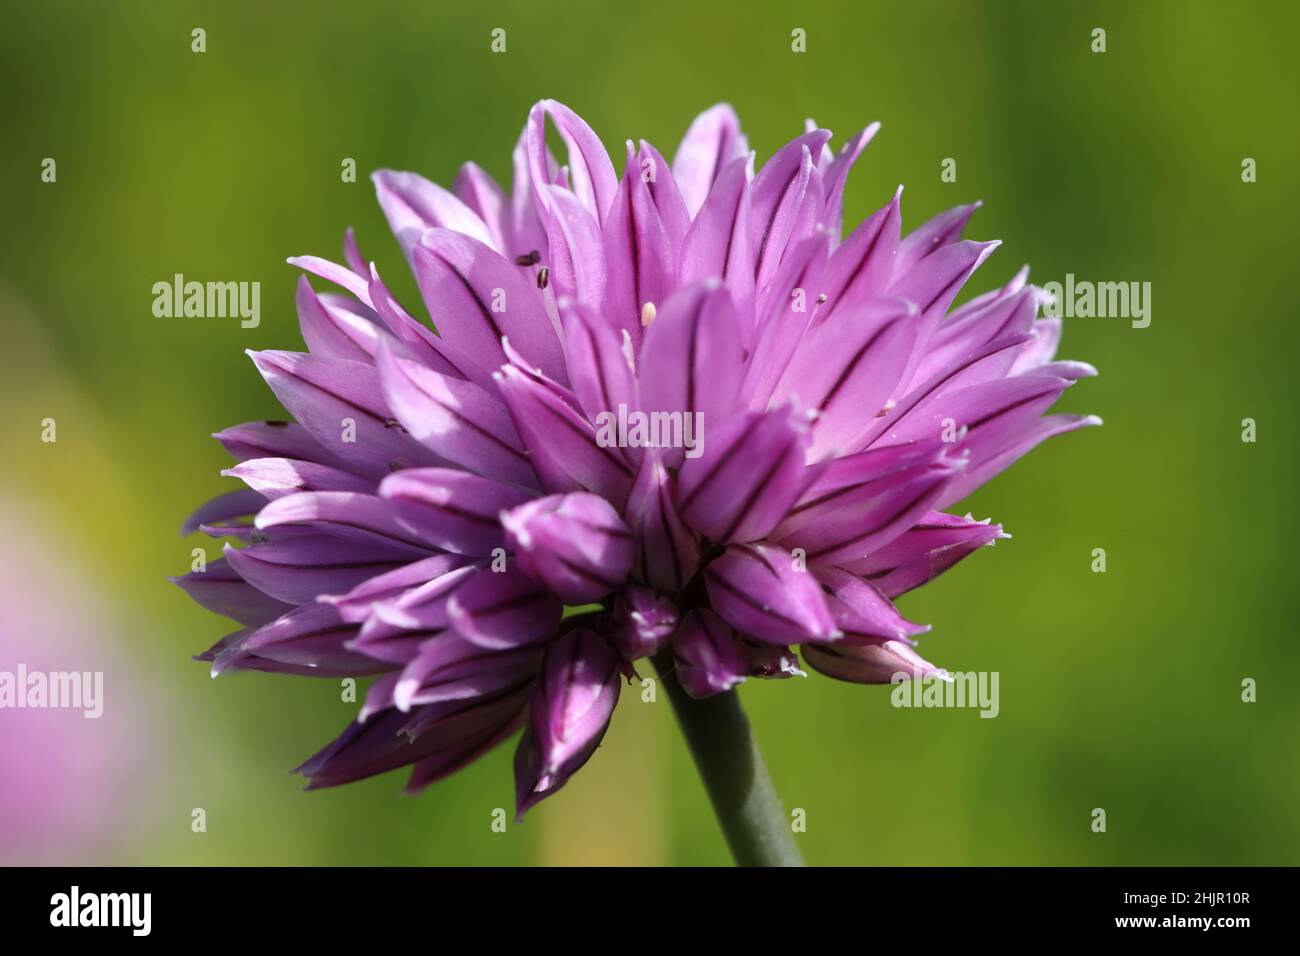 close-up of a pretty purple chives flower against a green background Stock Photo